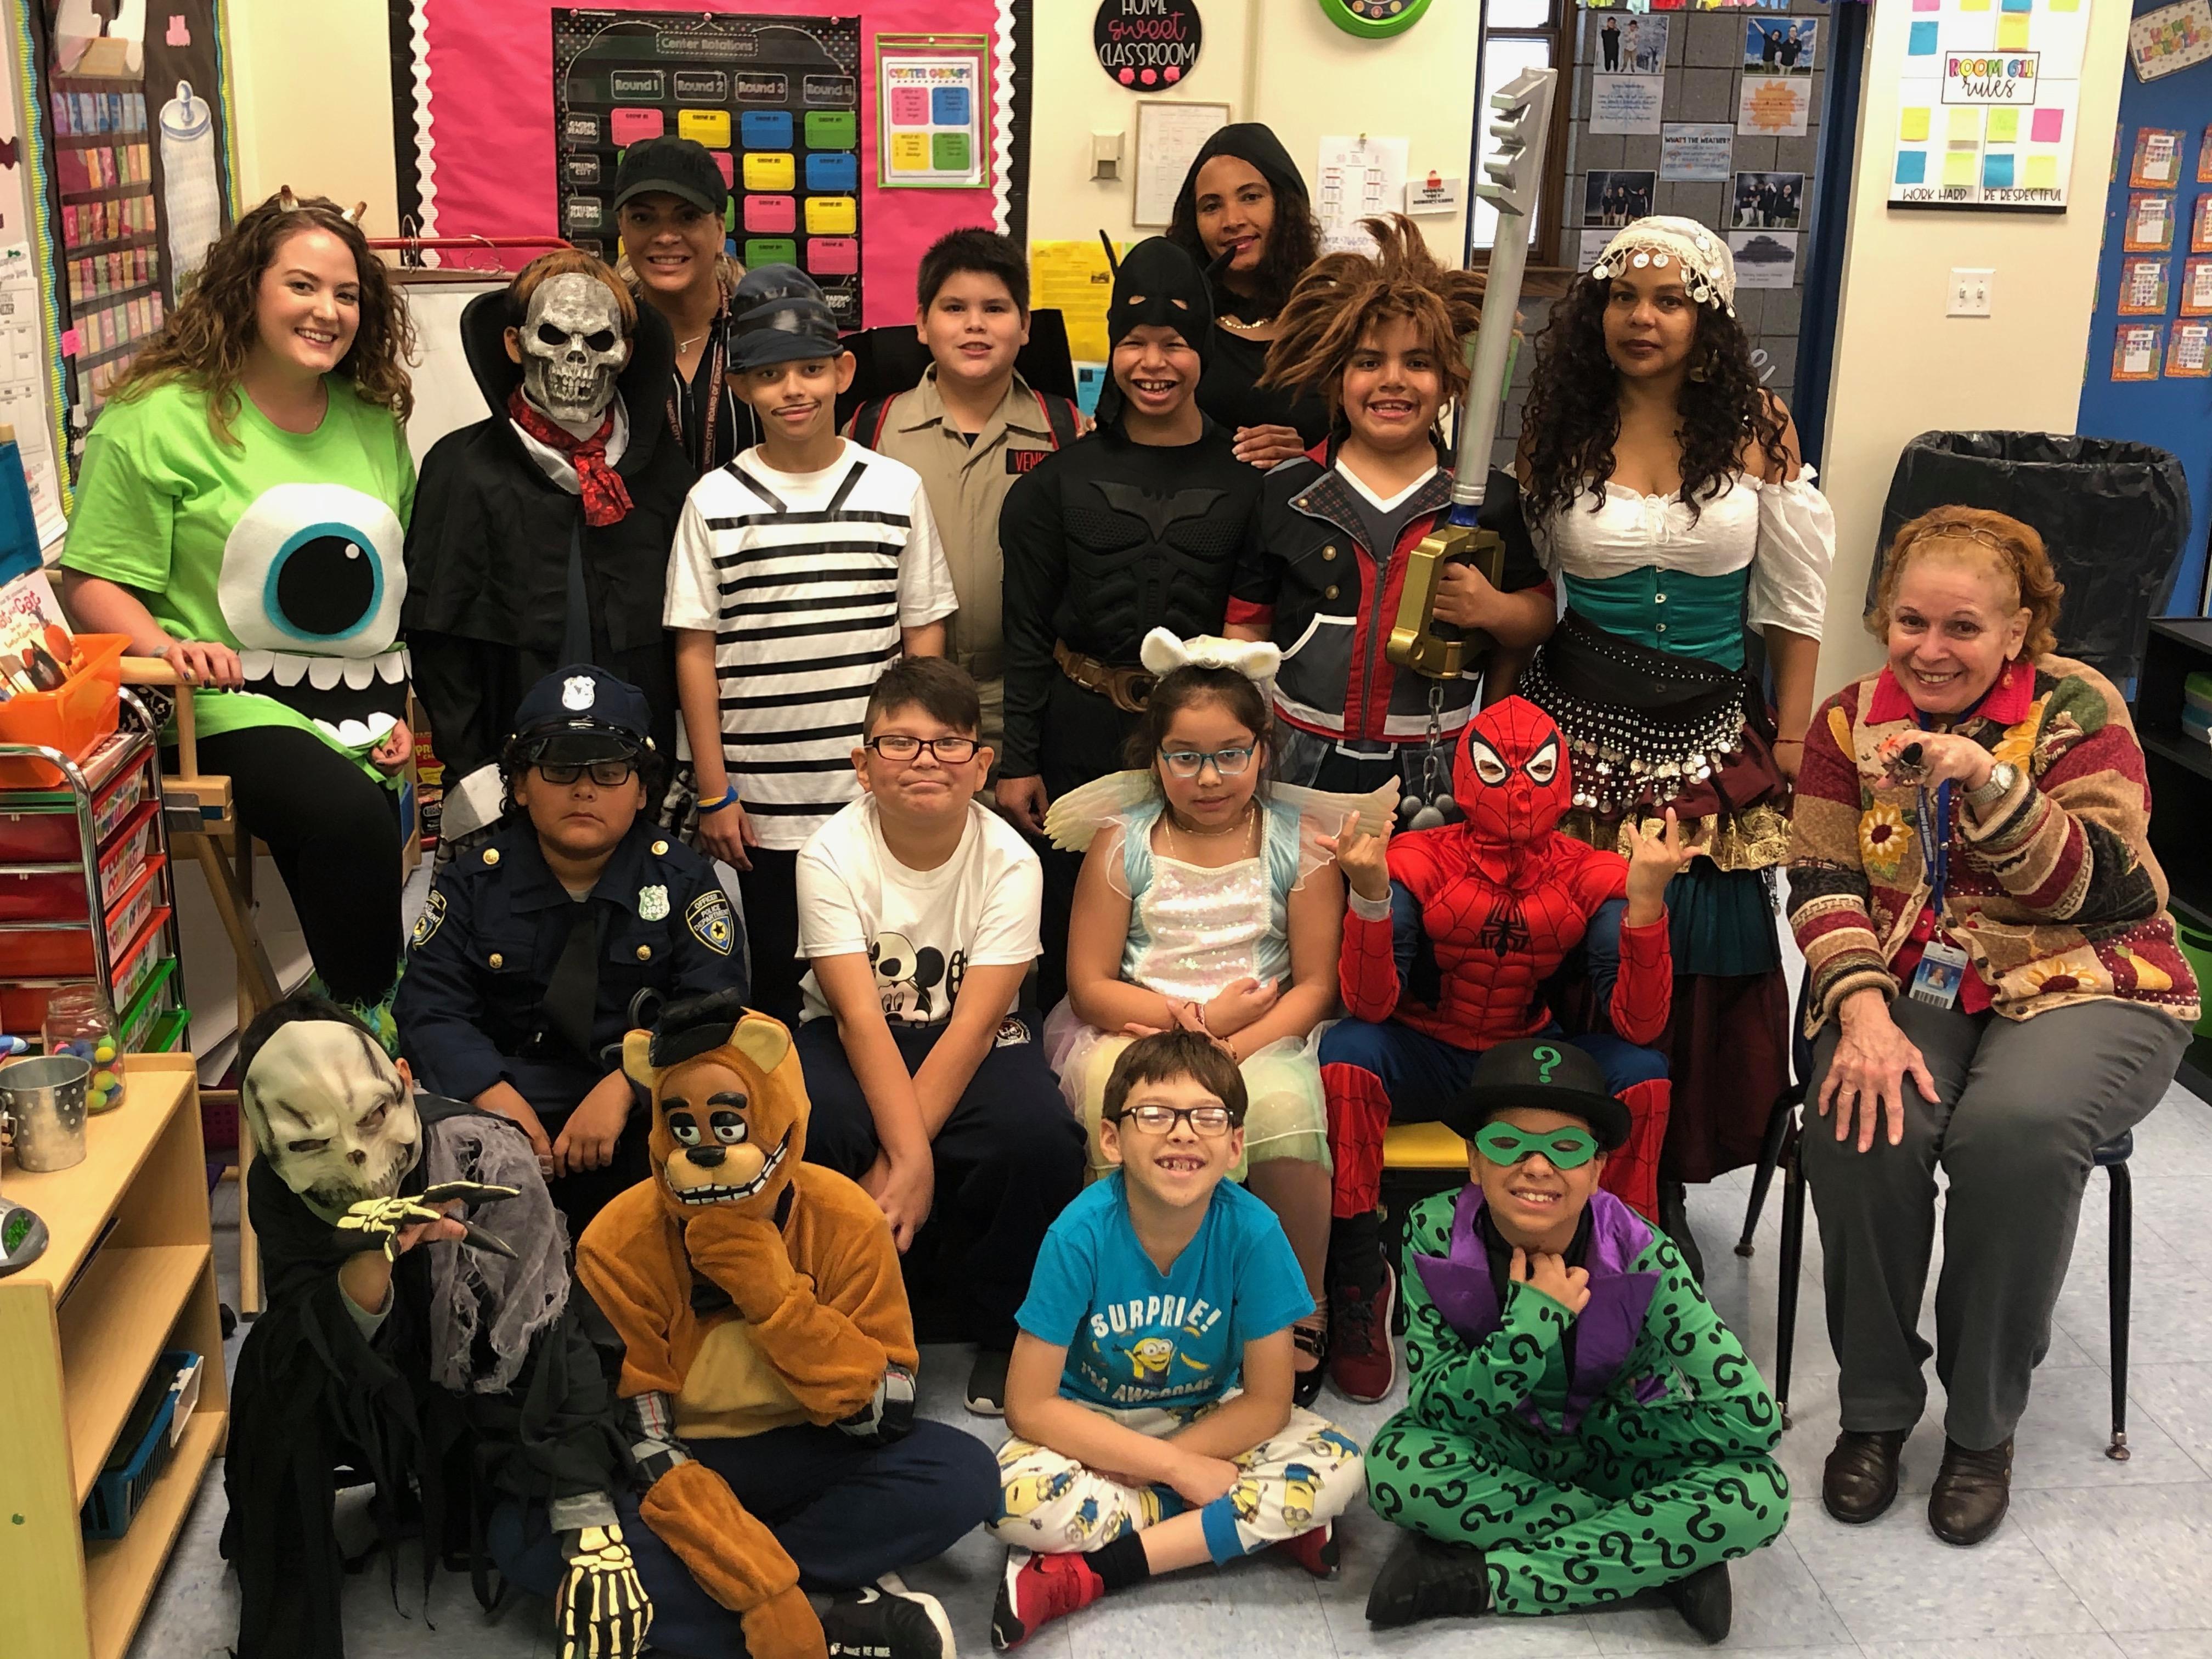 Mr. Kadens's class with aides dressed in costumes